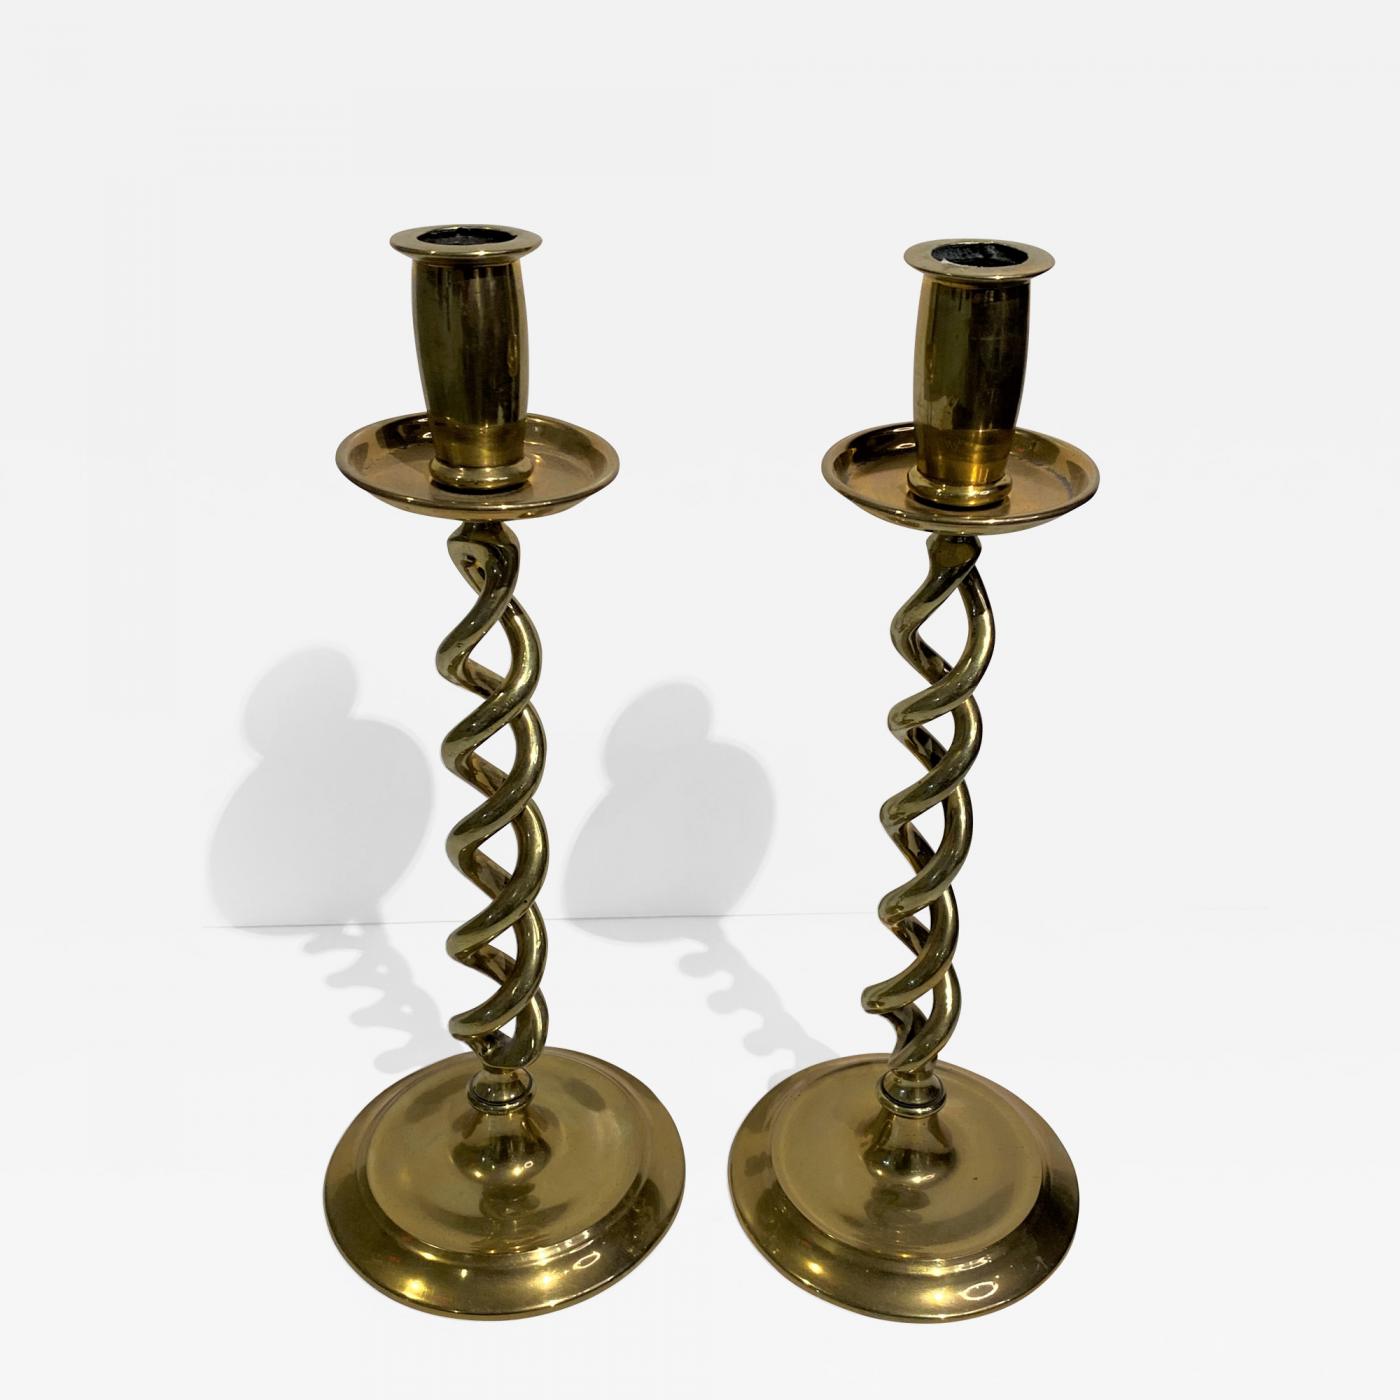 Do brass old candlesticks with what to HOW TO